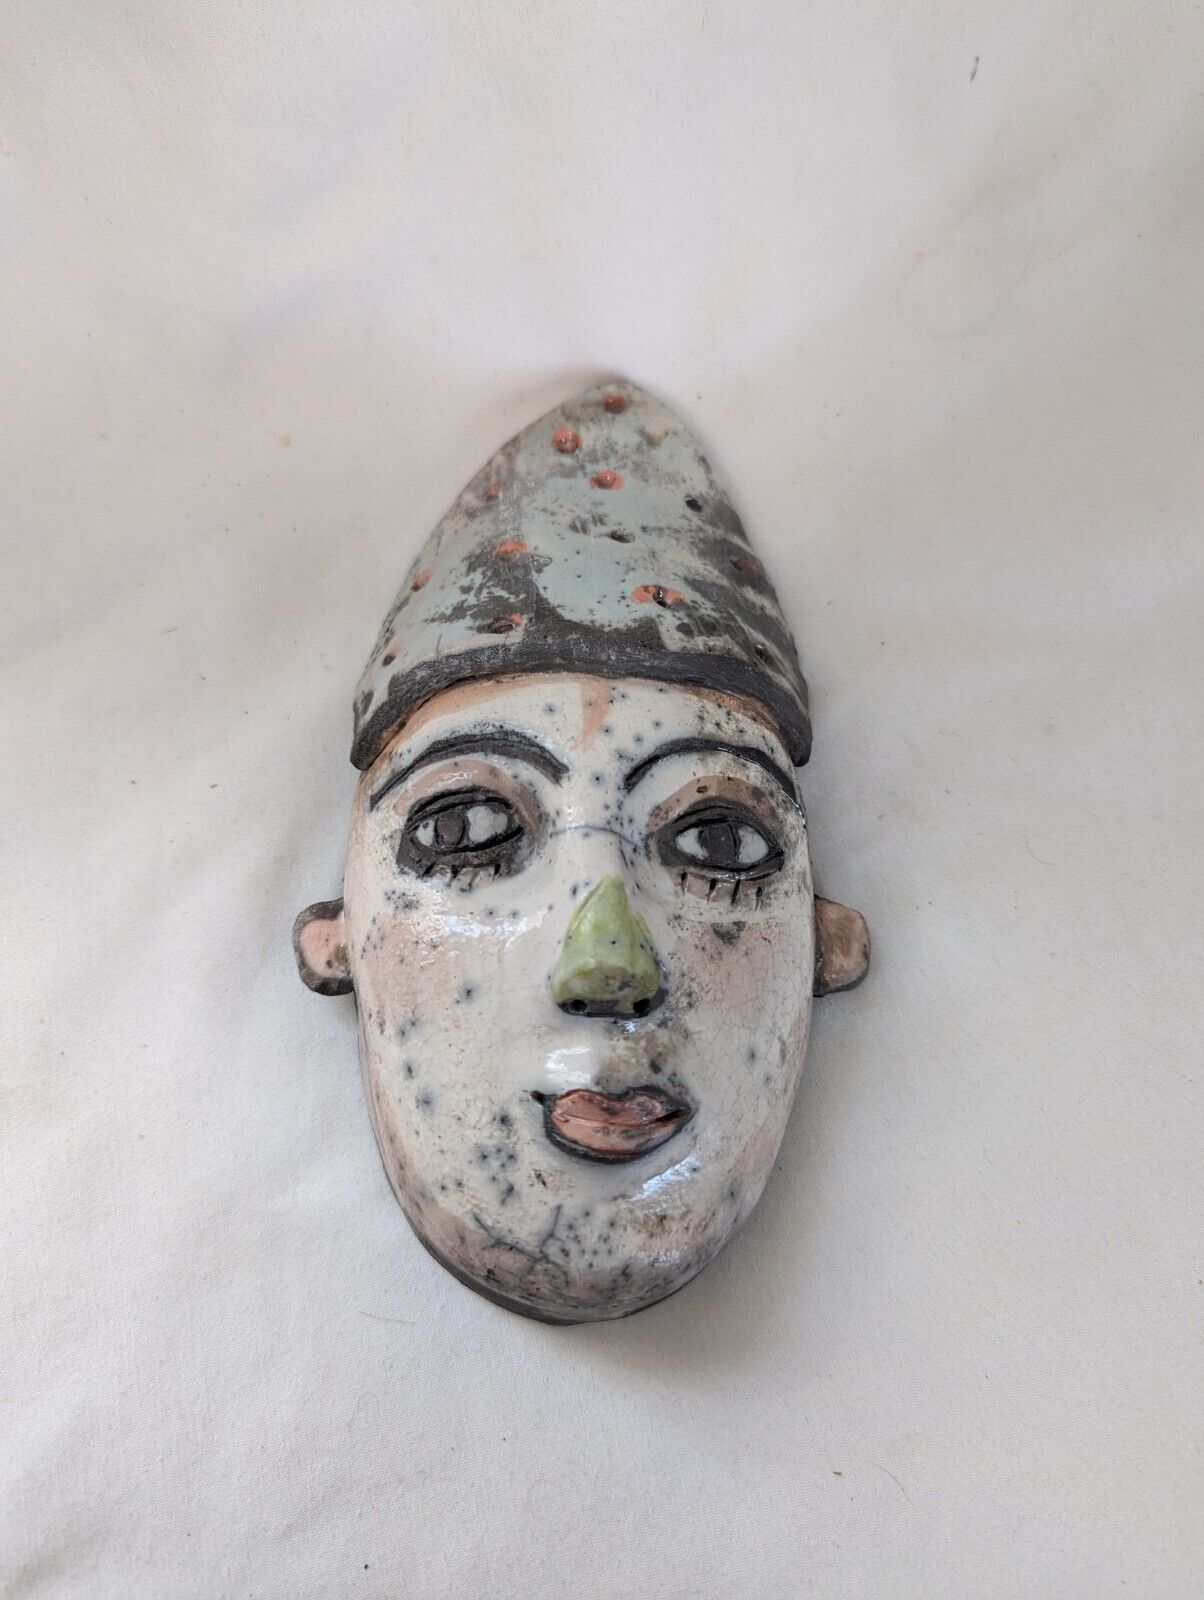 OOAK - ceramic sculpture wall hanging, face, whimsical